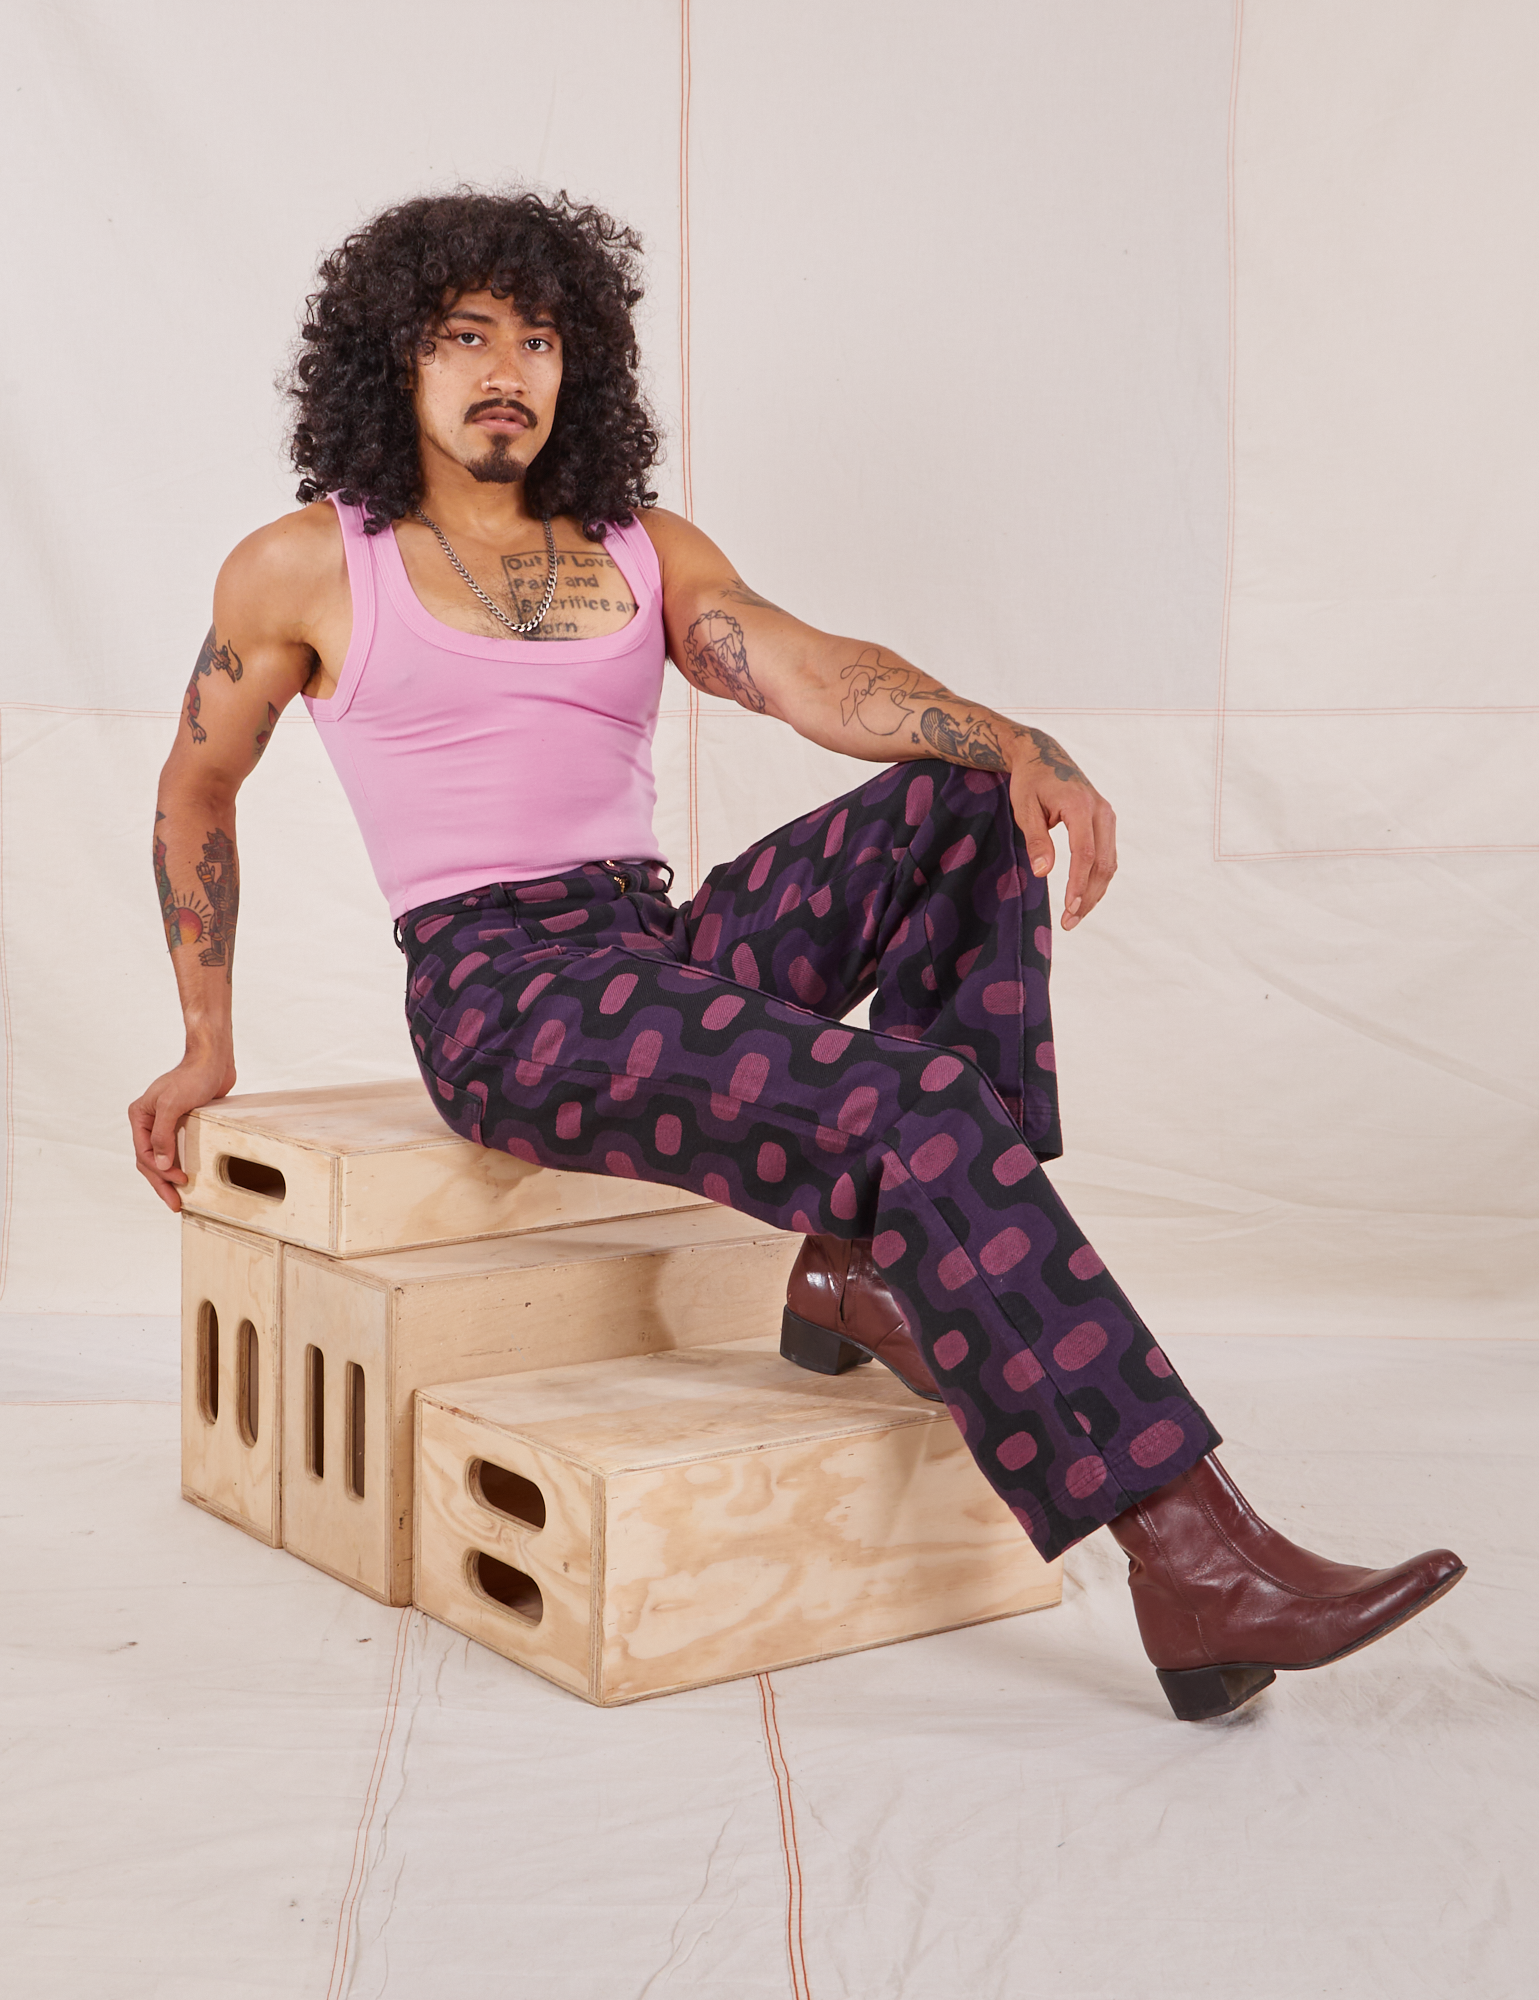 Jesse is wearing Western Pants in Purple Tile Jacquard and bubblegum pink Cropped Tank Top